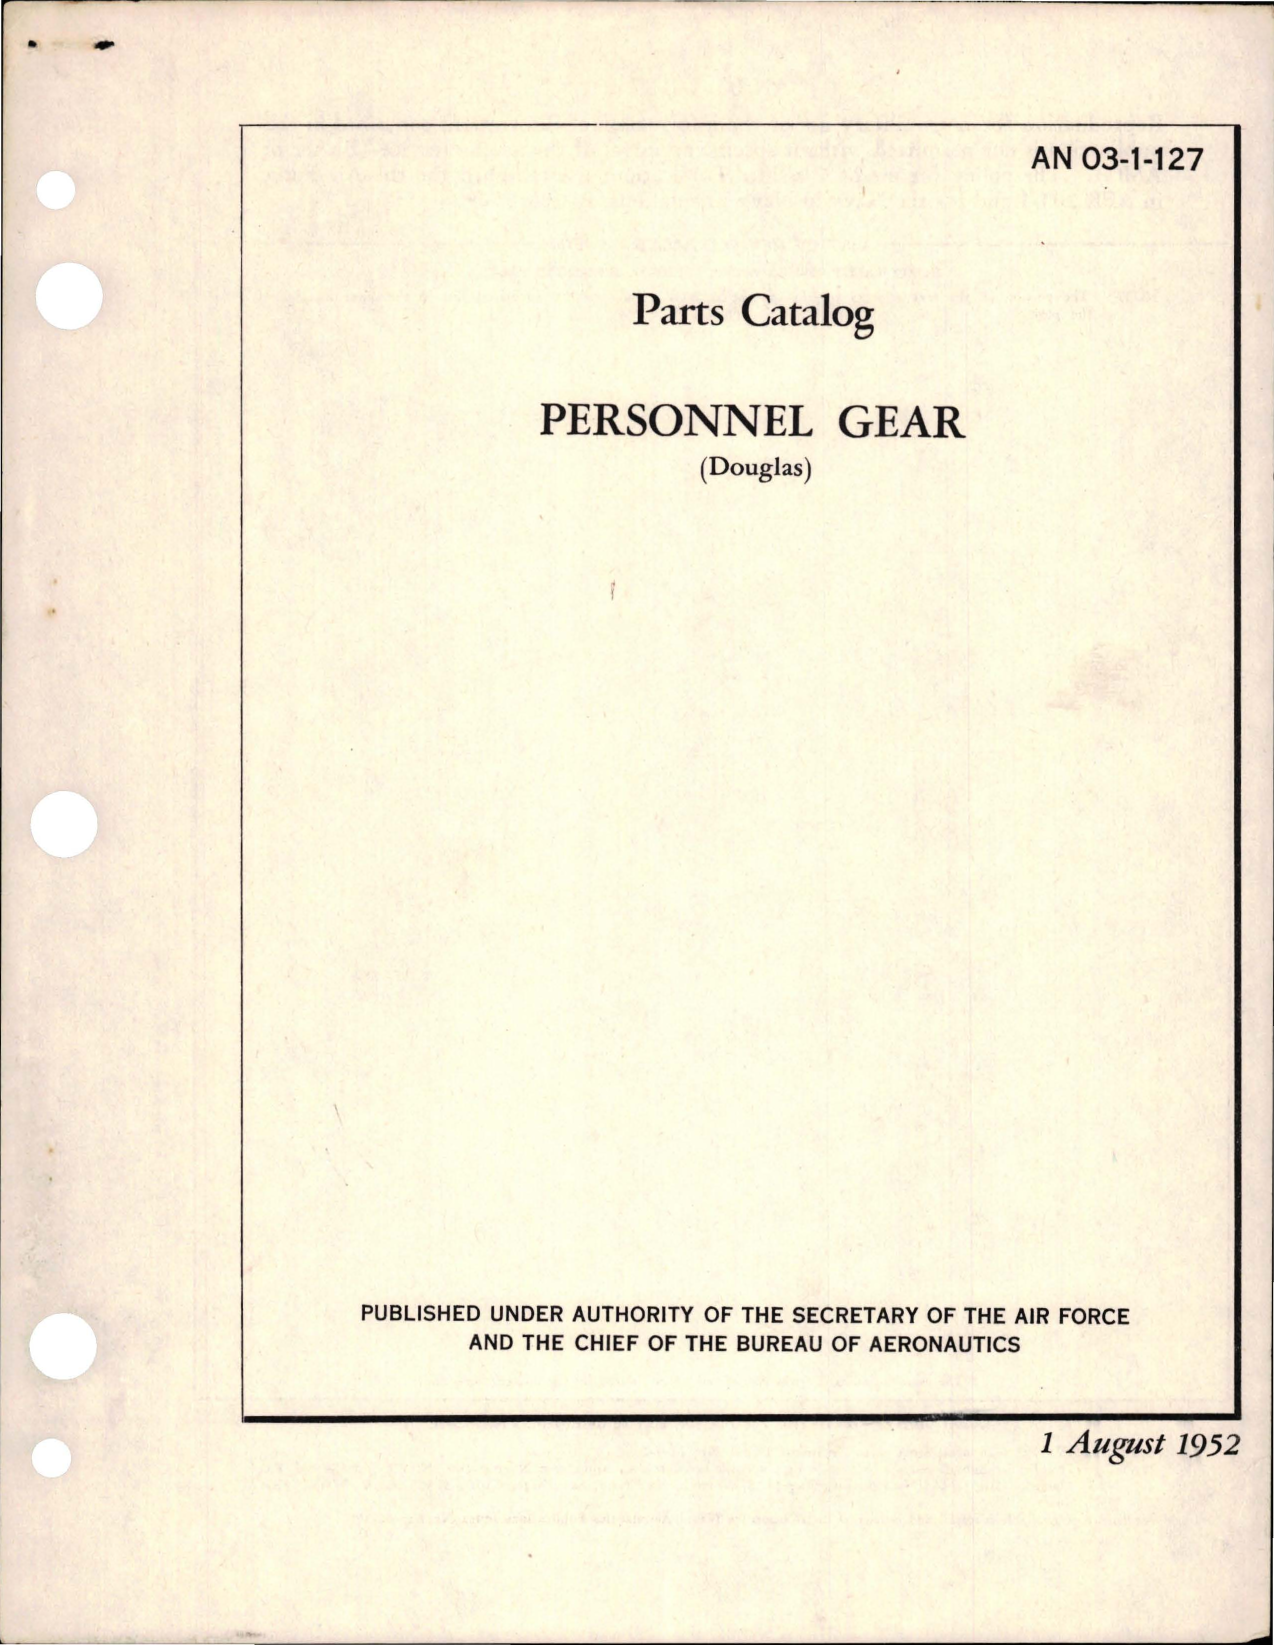 Sample page 1 from AirCorps Library document: Parts Catalog for Personnel Gear 